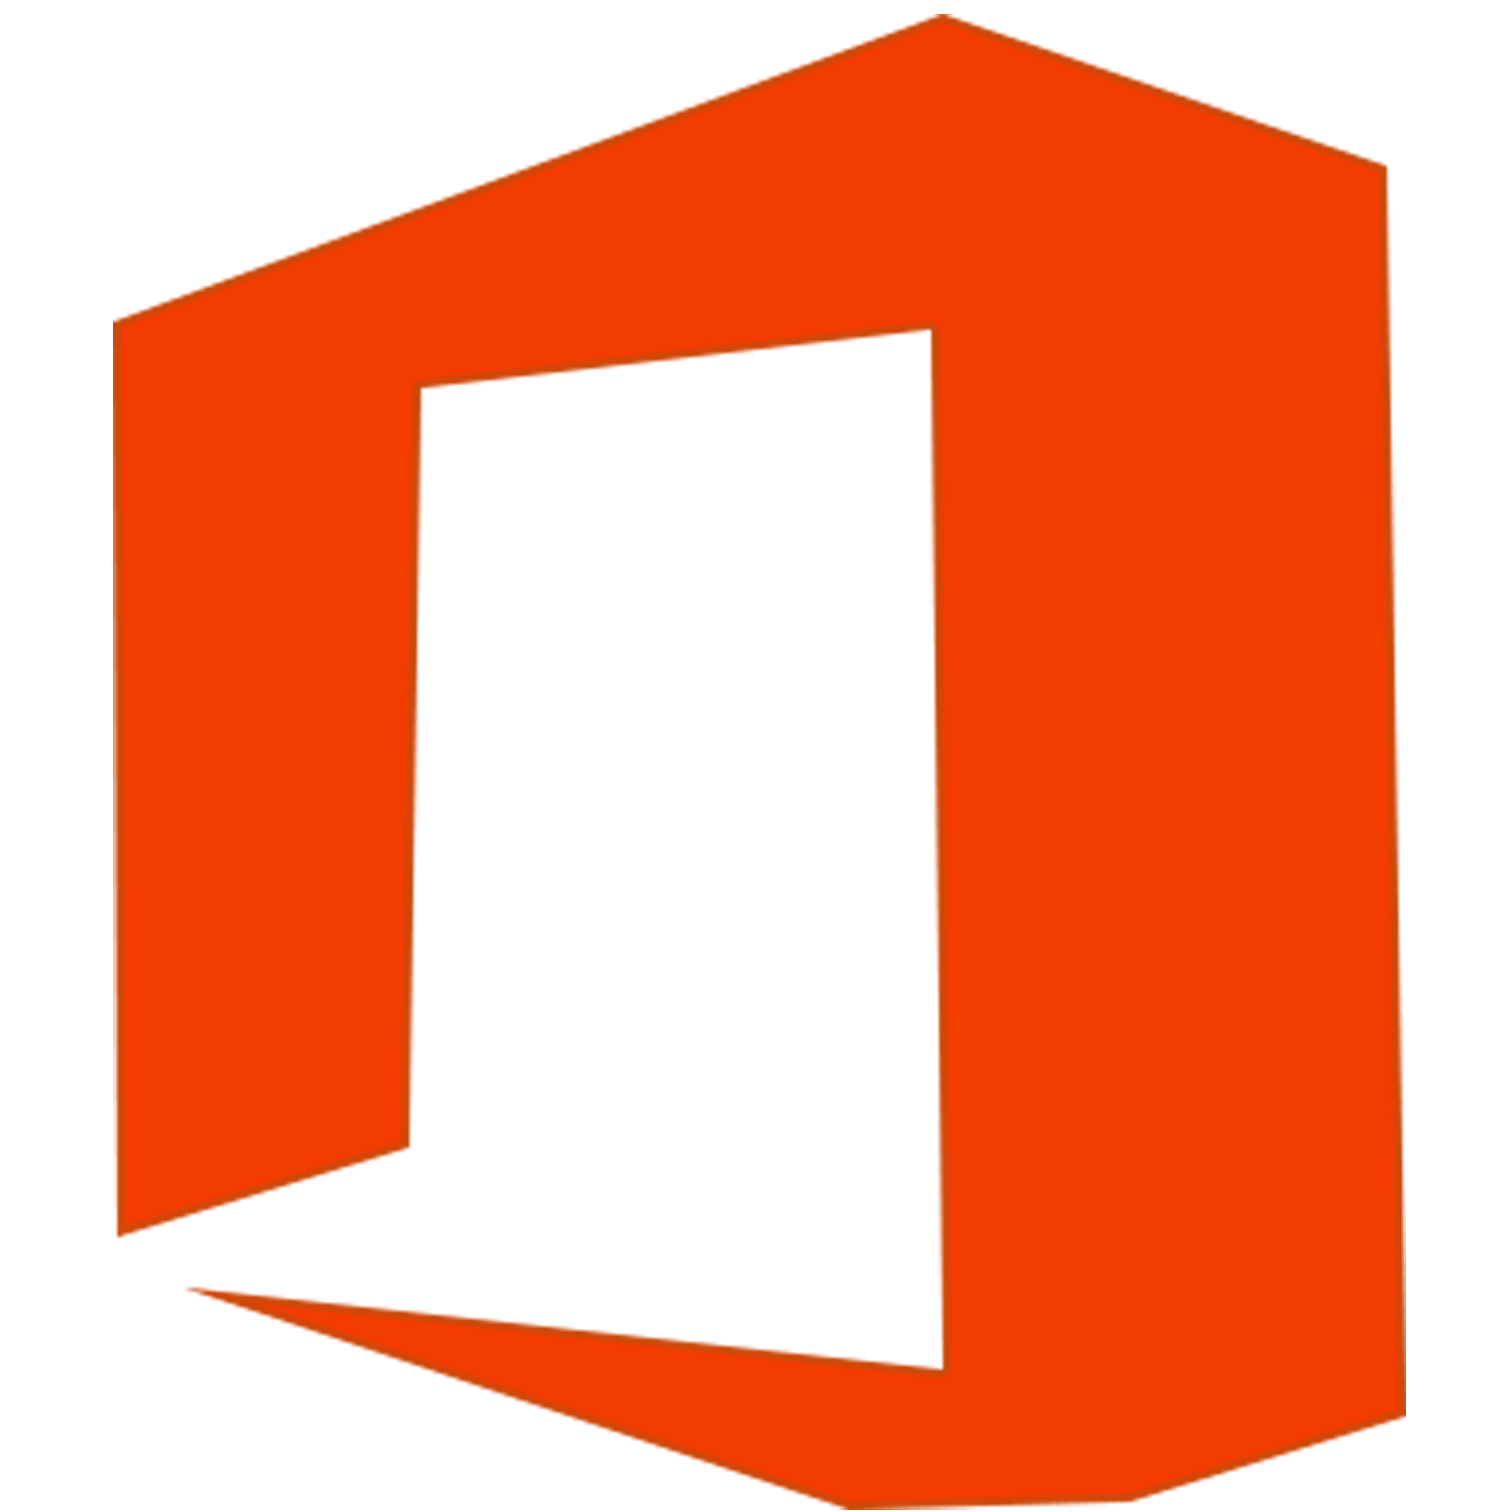 Microsoft Office 2013 (2023.07) Standart / Pro Plus download the new for mac